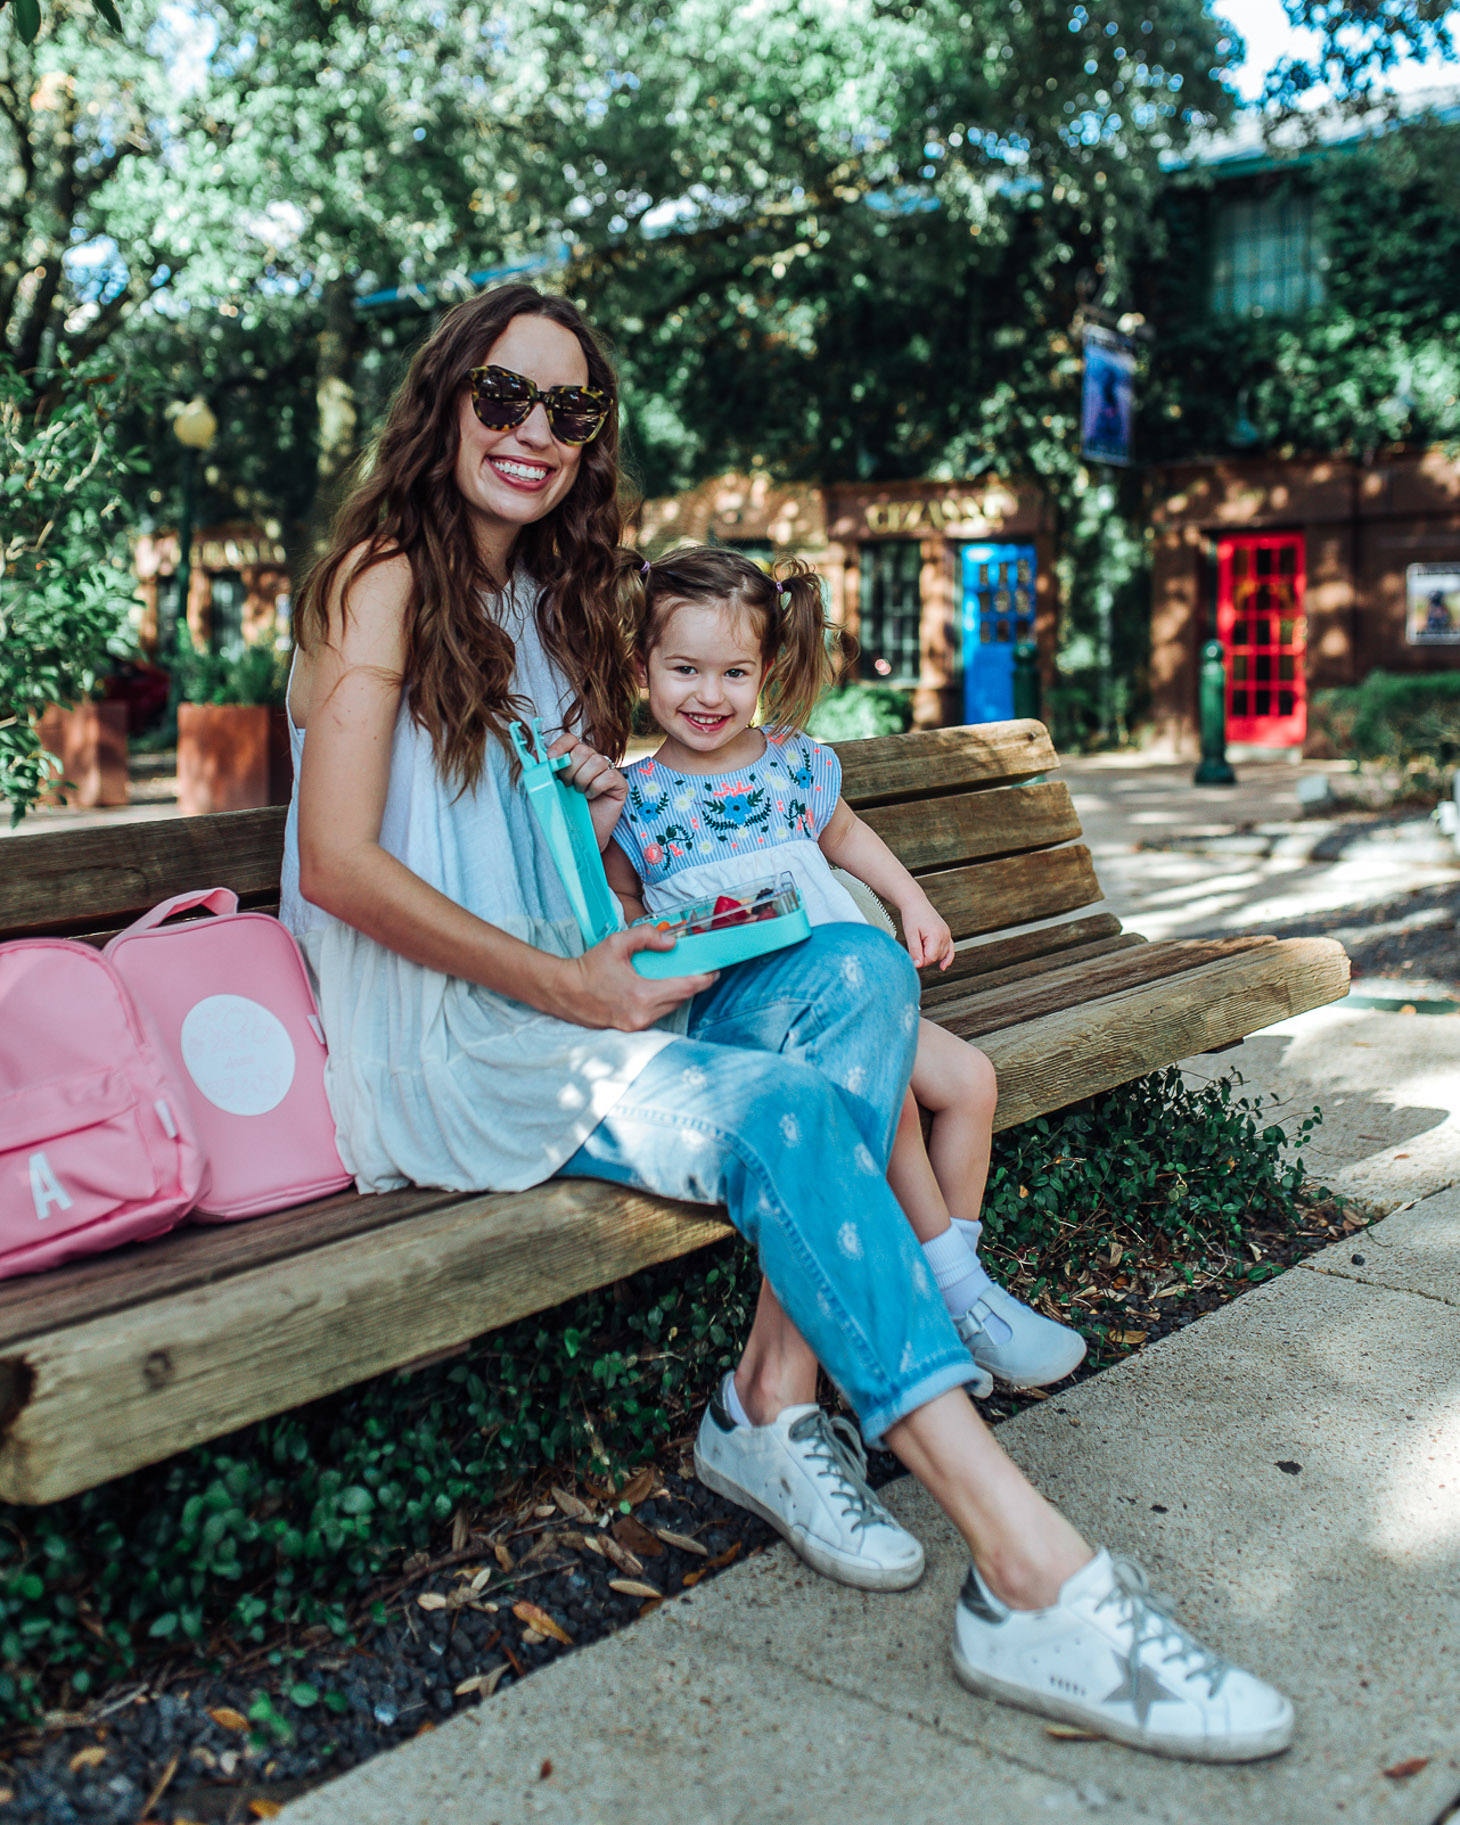 Back to school essentials for preschoolers featured by top US lifestyle blog, Lone Star Looking Glass